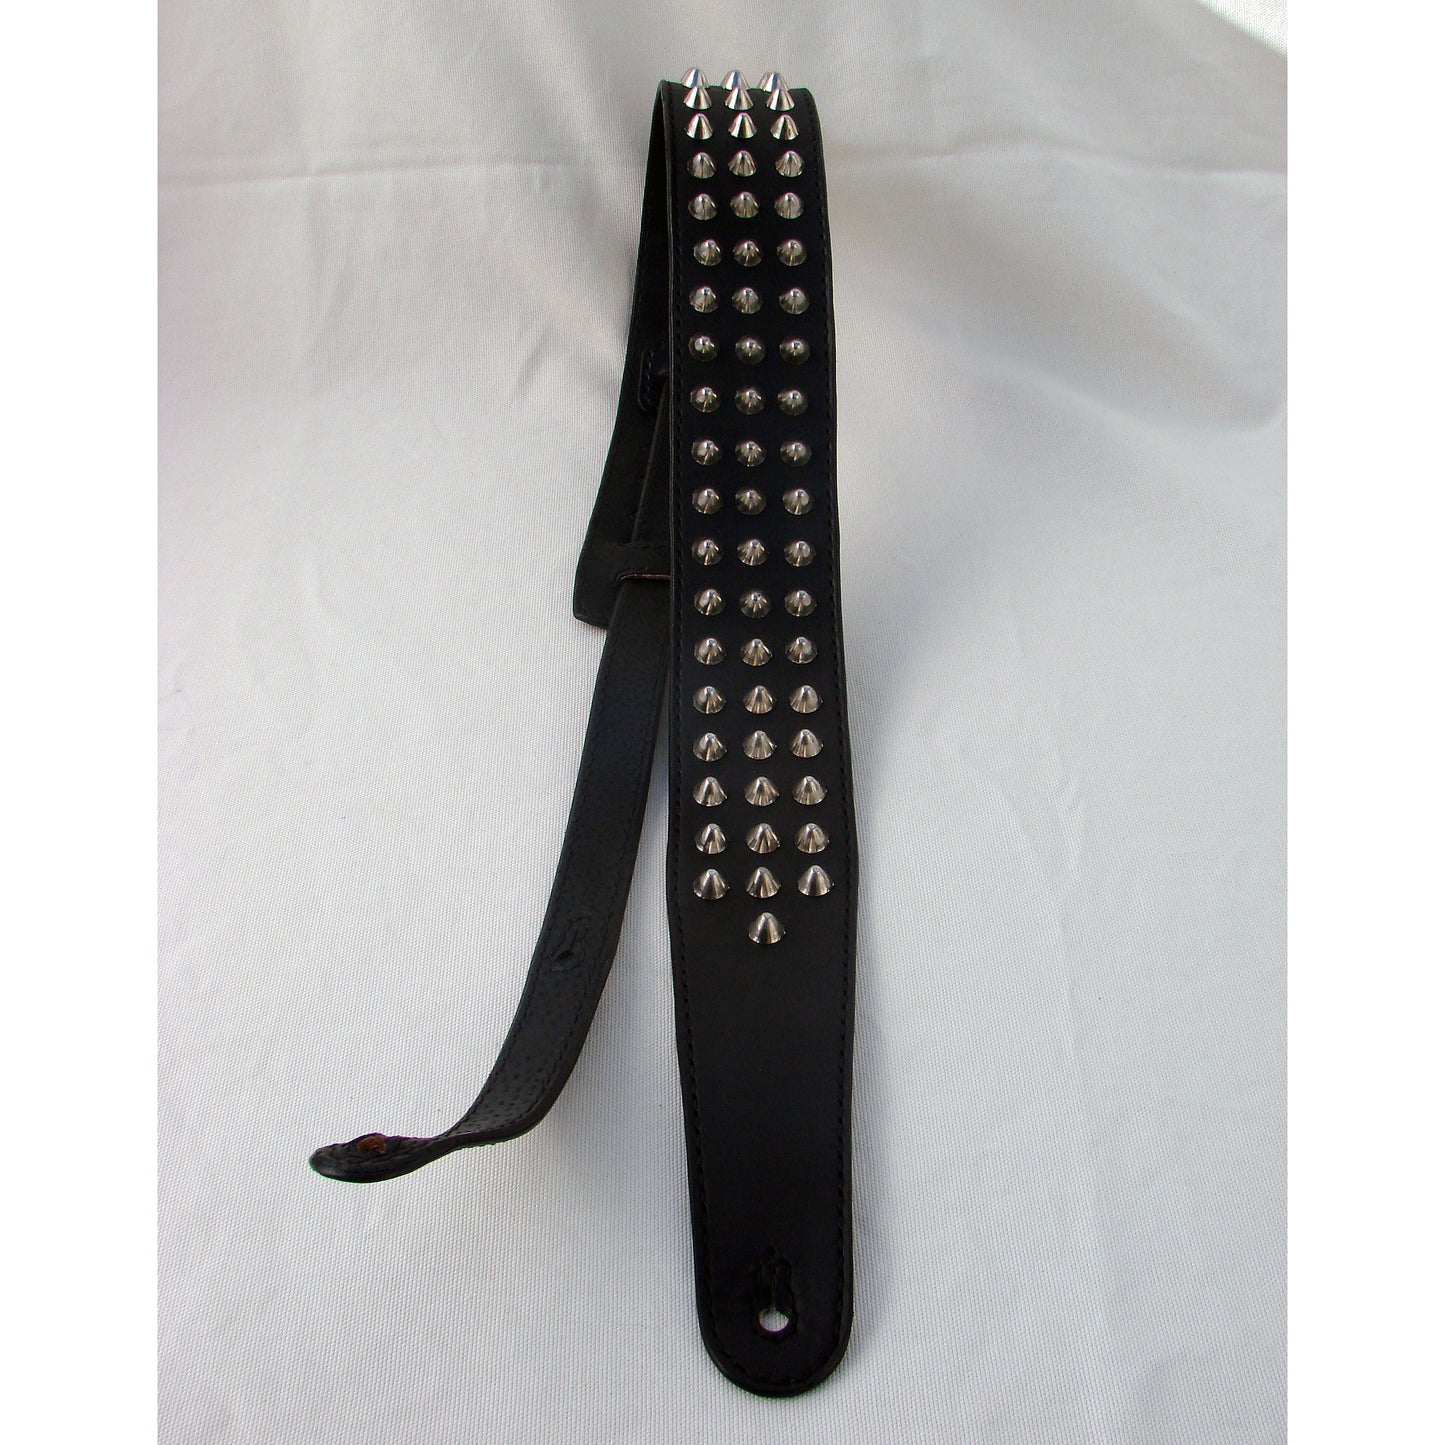 Leather Guitar Strap 3 rows of spikes